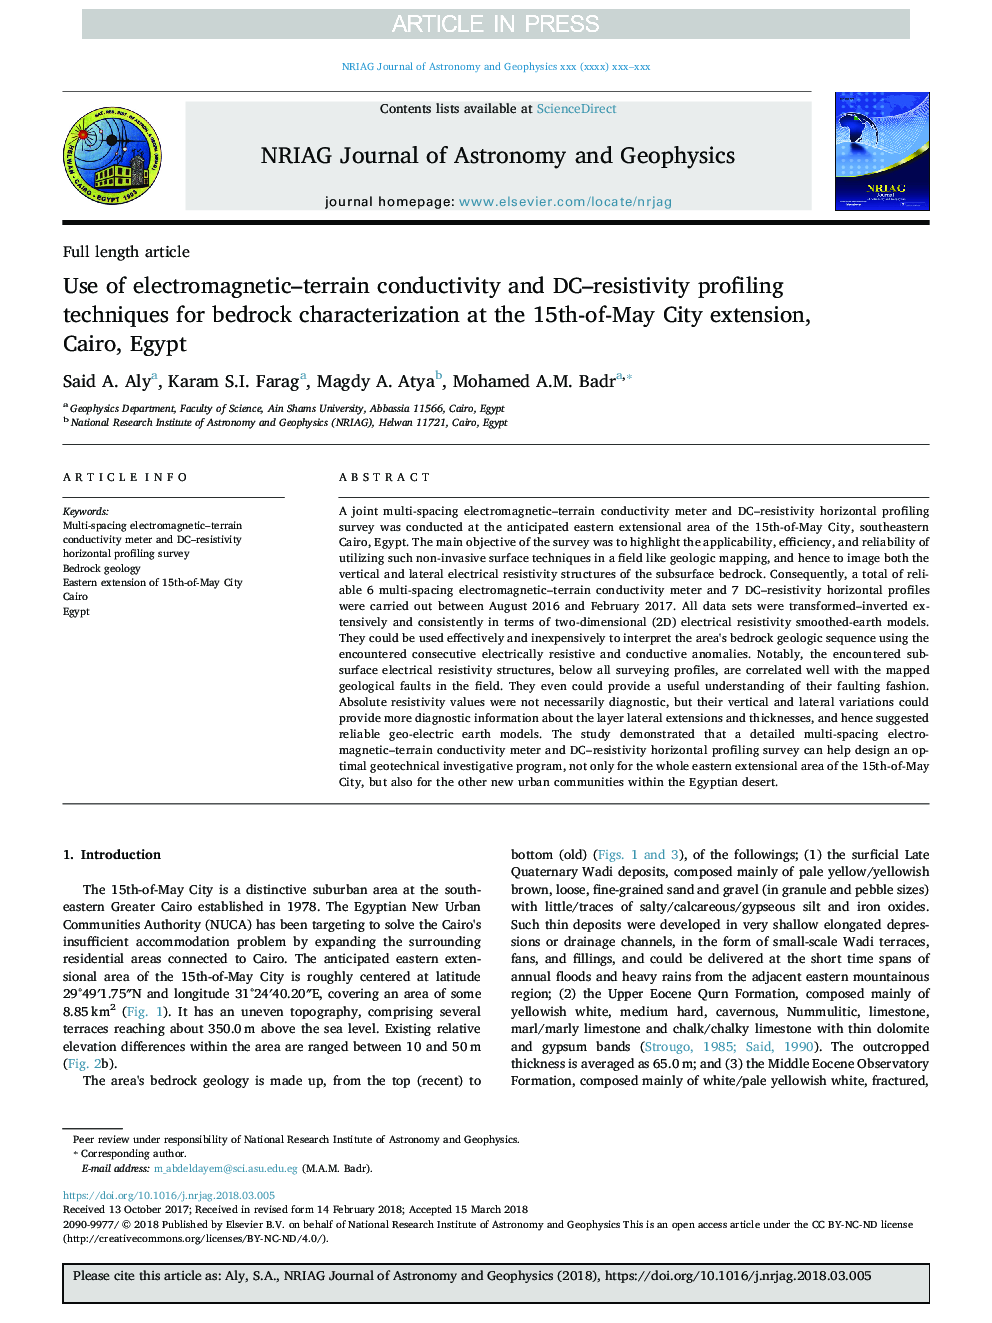 Use of electromagnetic-terrain conductivity and DC-resistivity profiling techniques for bedrock characterization at the 15th-of-May City extension, Cairo, Egypt